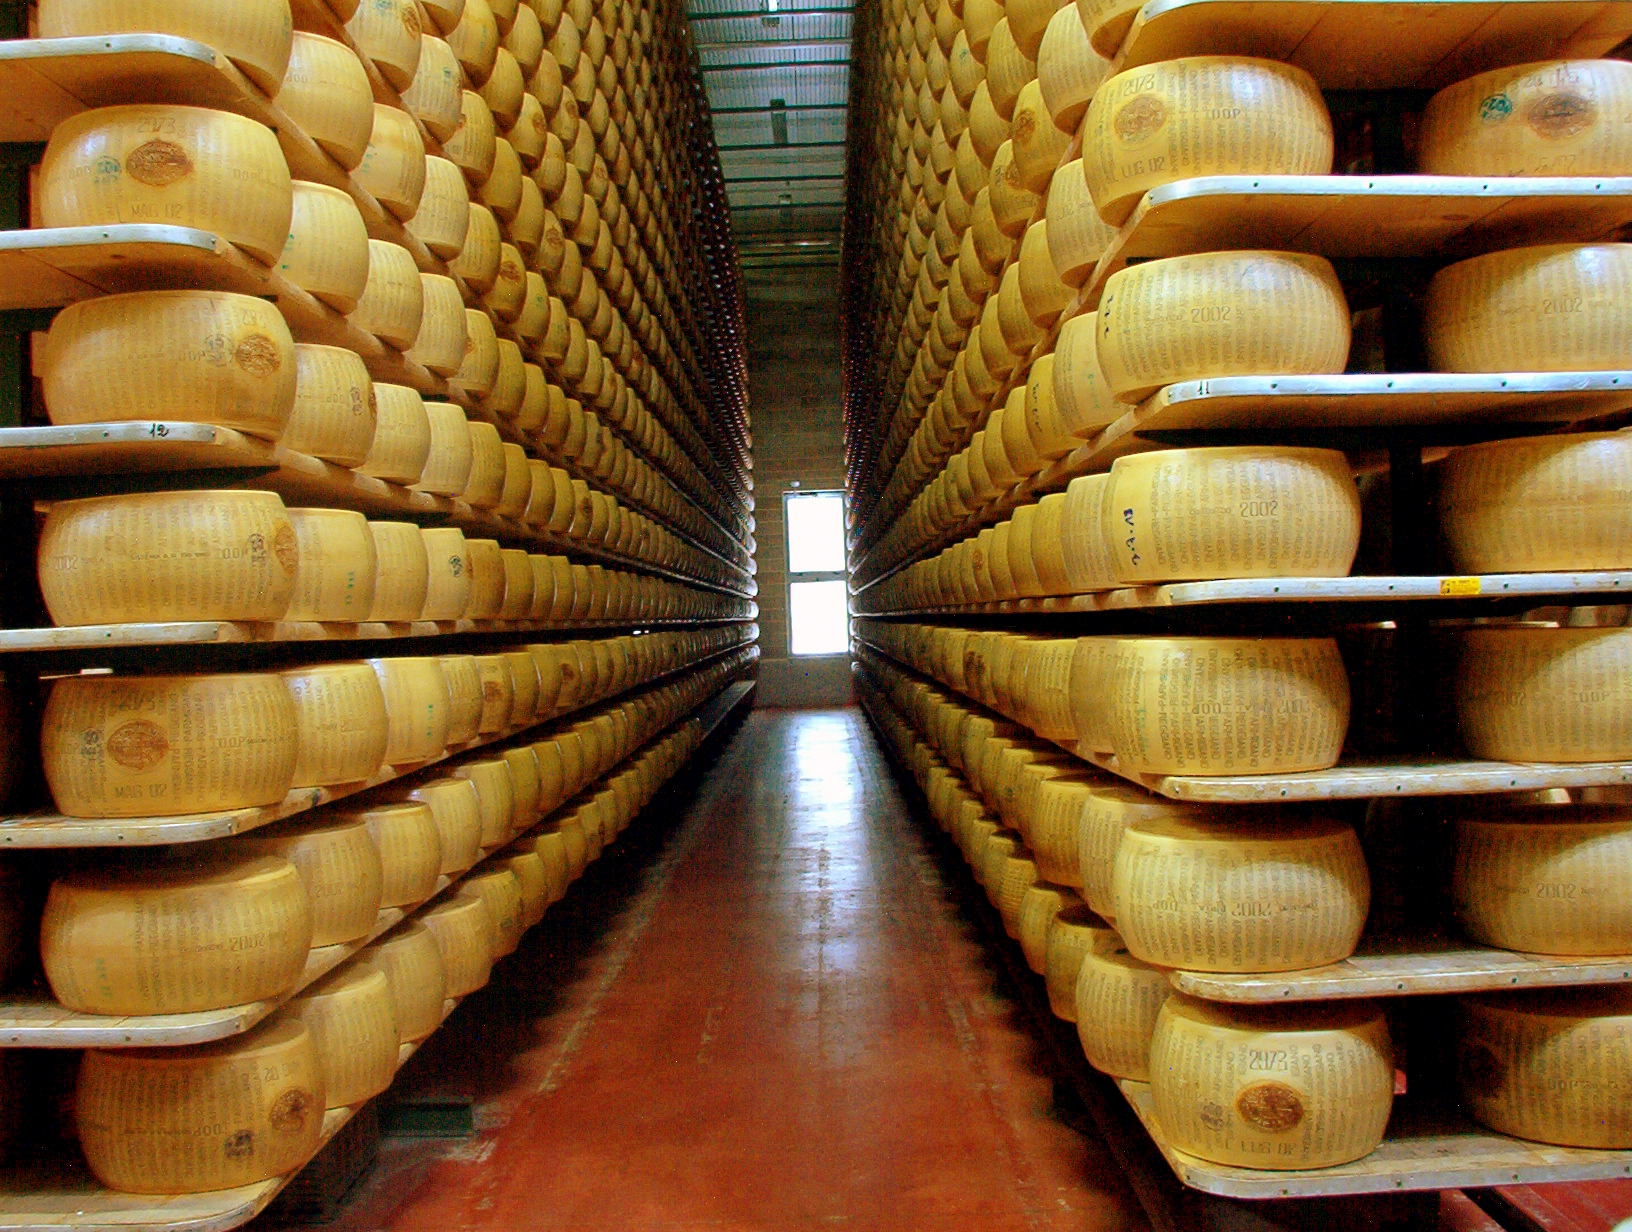 New Power Plant in the French Alps Generates Power From Cheese